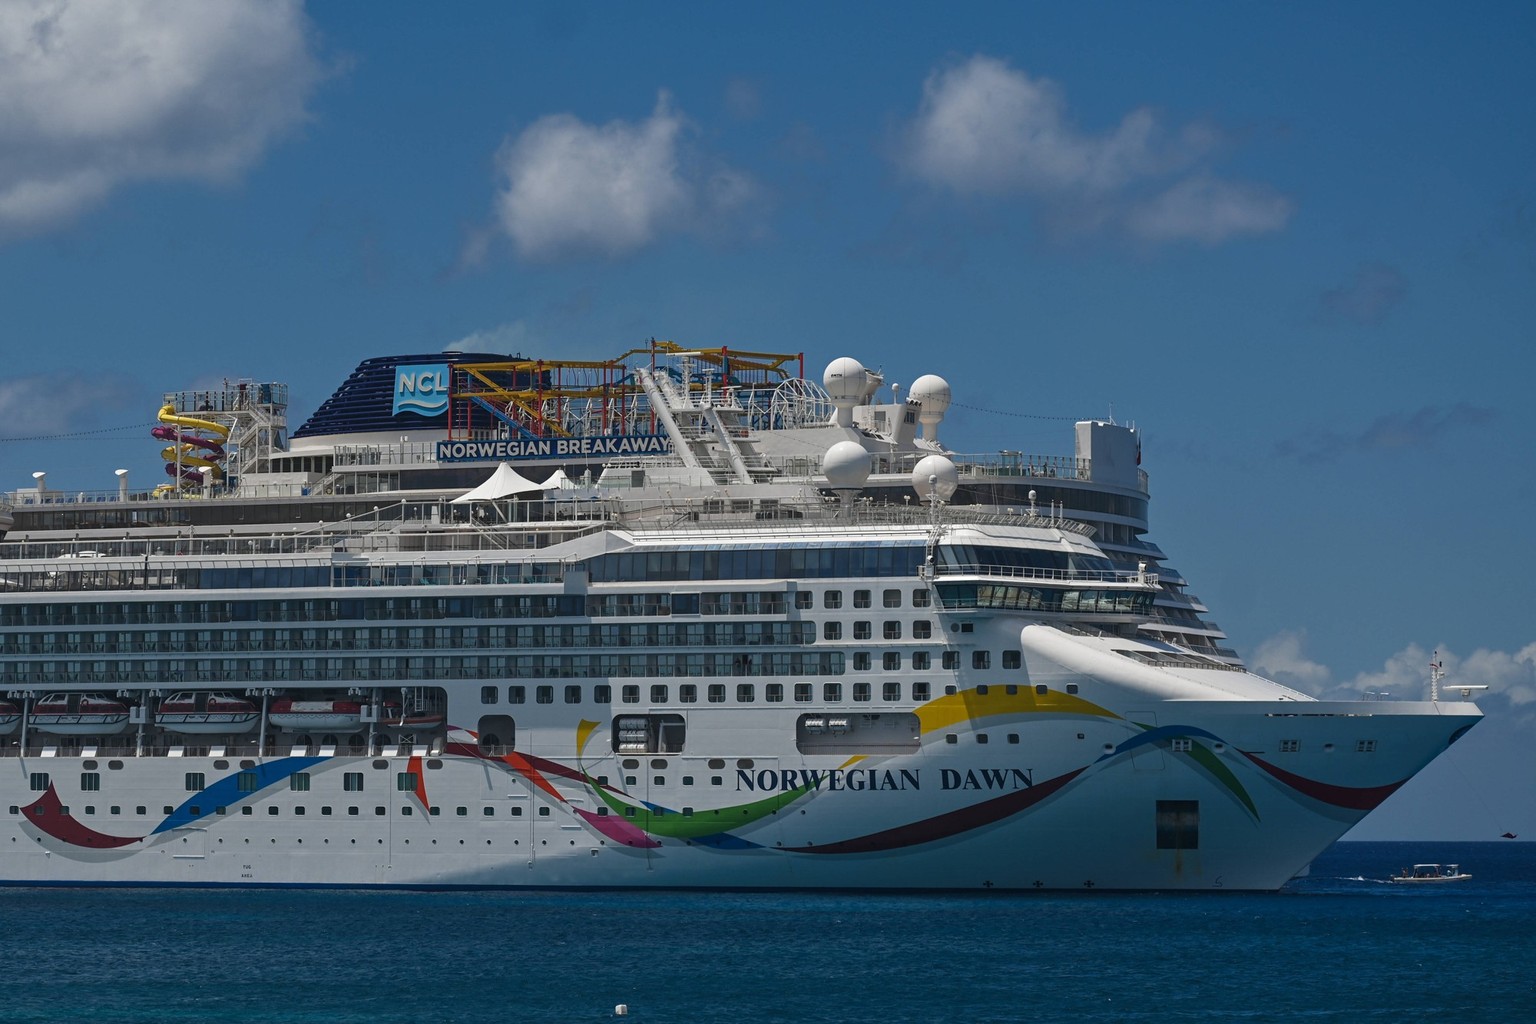 Daily Life In Cozumel During The Covid-19 Pandemic Norwegian Dawn cruise ship in San Miguel de Cozumel. On Tuesday, 22 March 2022, in San Miguel de Cozumel, Cozumel Island, Quintana Roo, Mexico. San M ...